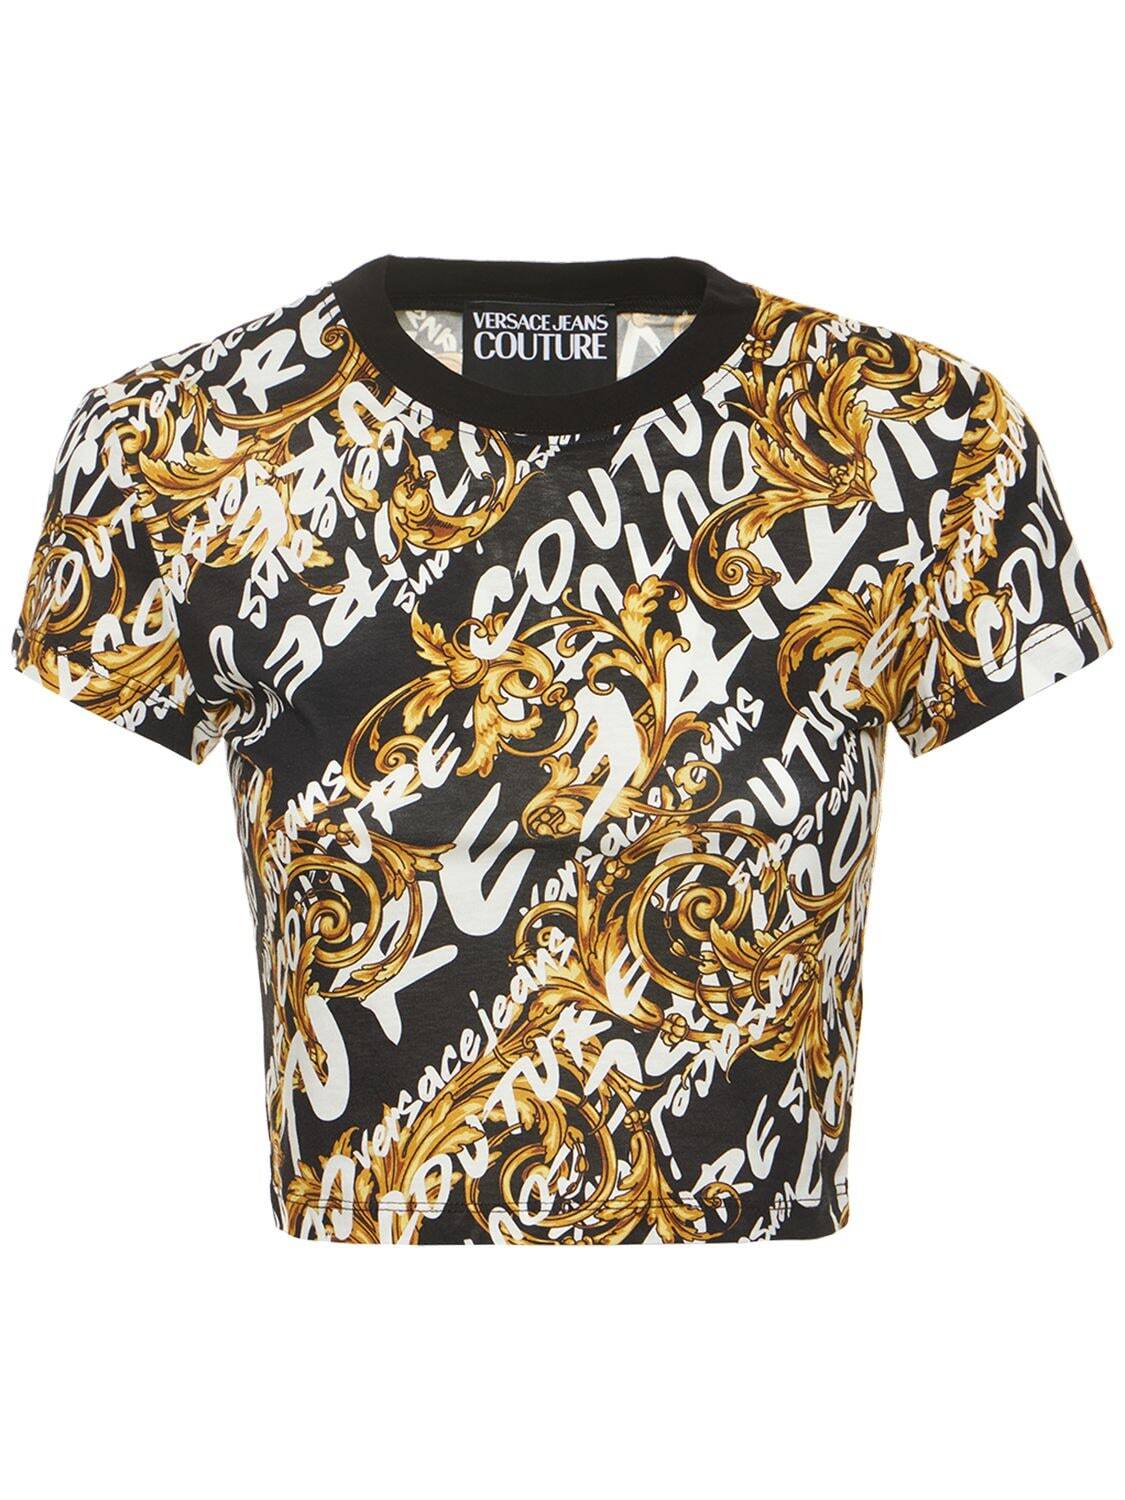 VERSACE JEANS COUTURE Printed Jersey Cropped T-shirt in black / multi